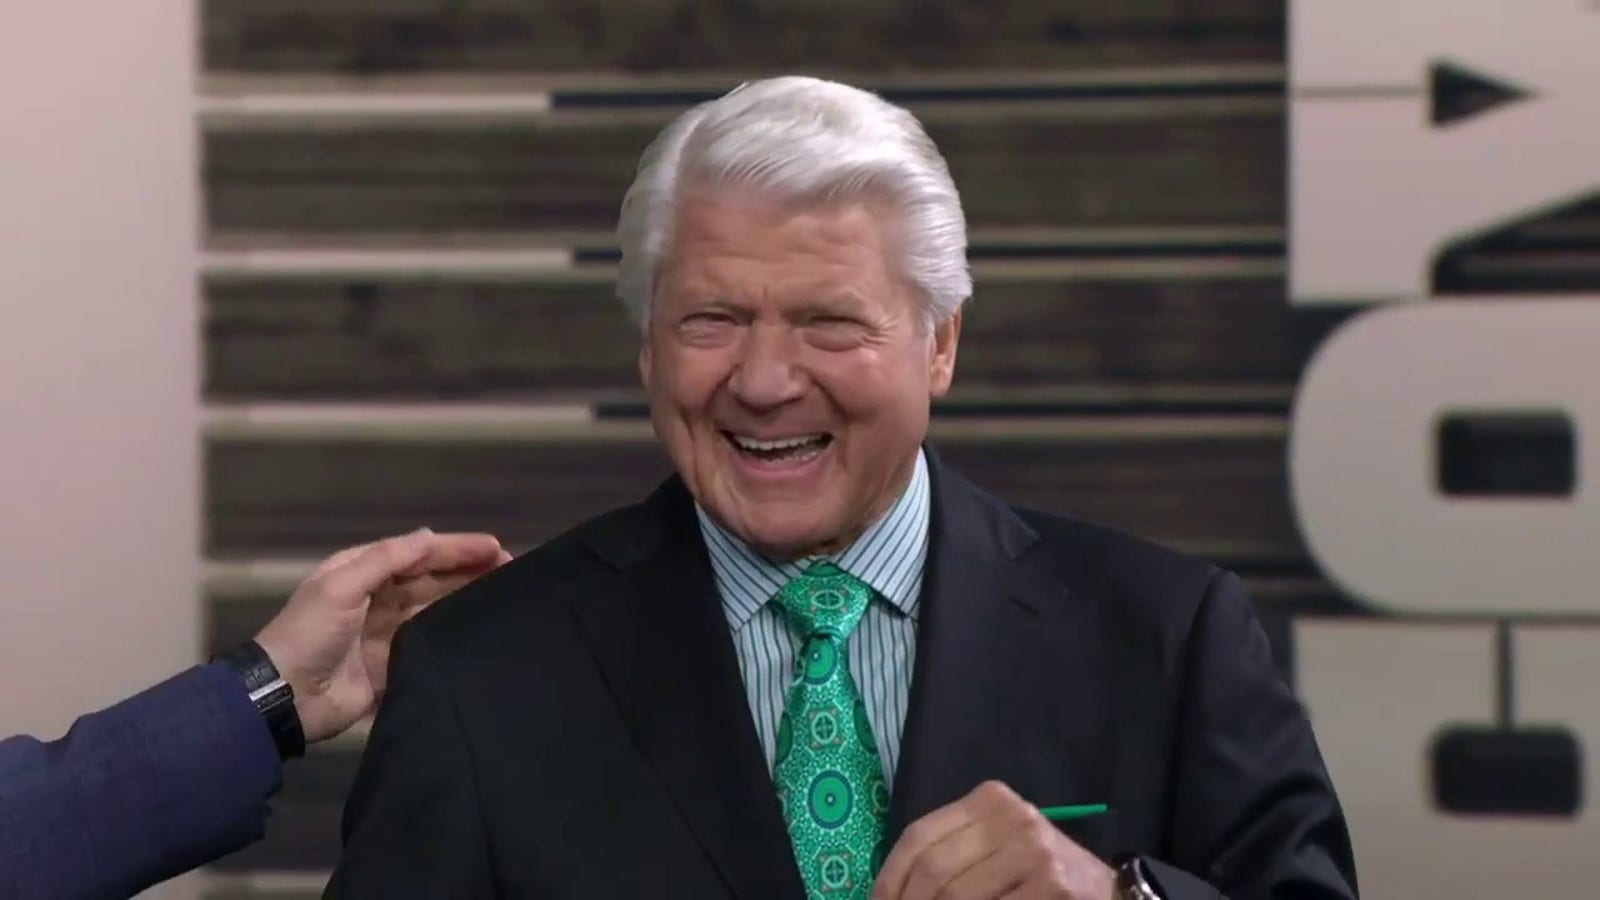 Jimmy Johnson gets emotional reflecting on Cowboys' 'Ring of Honor' induction 